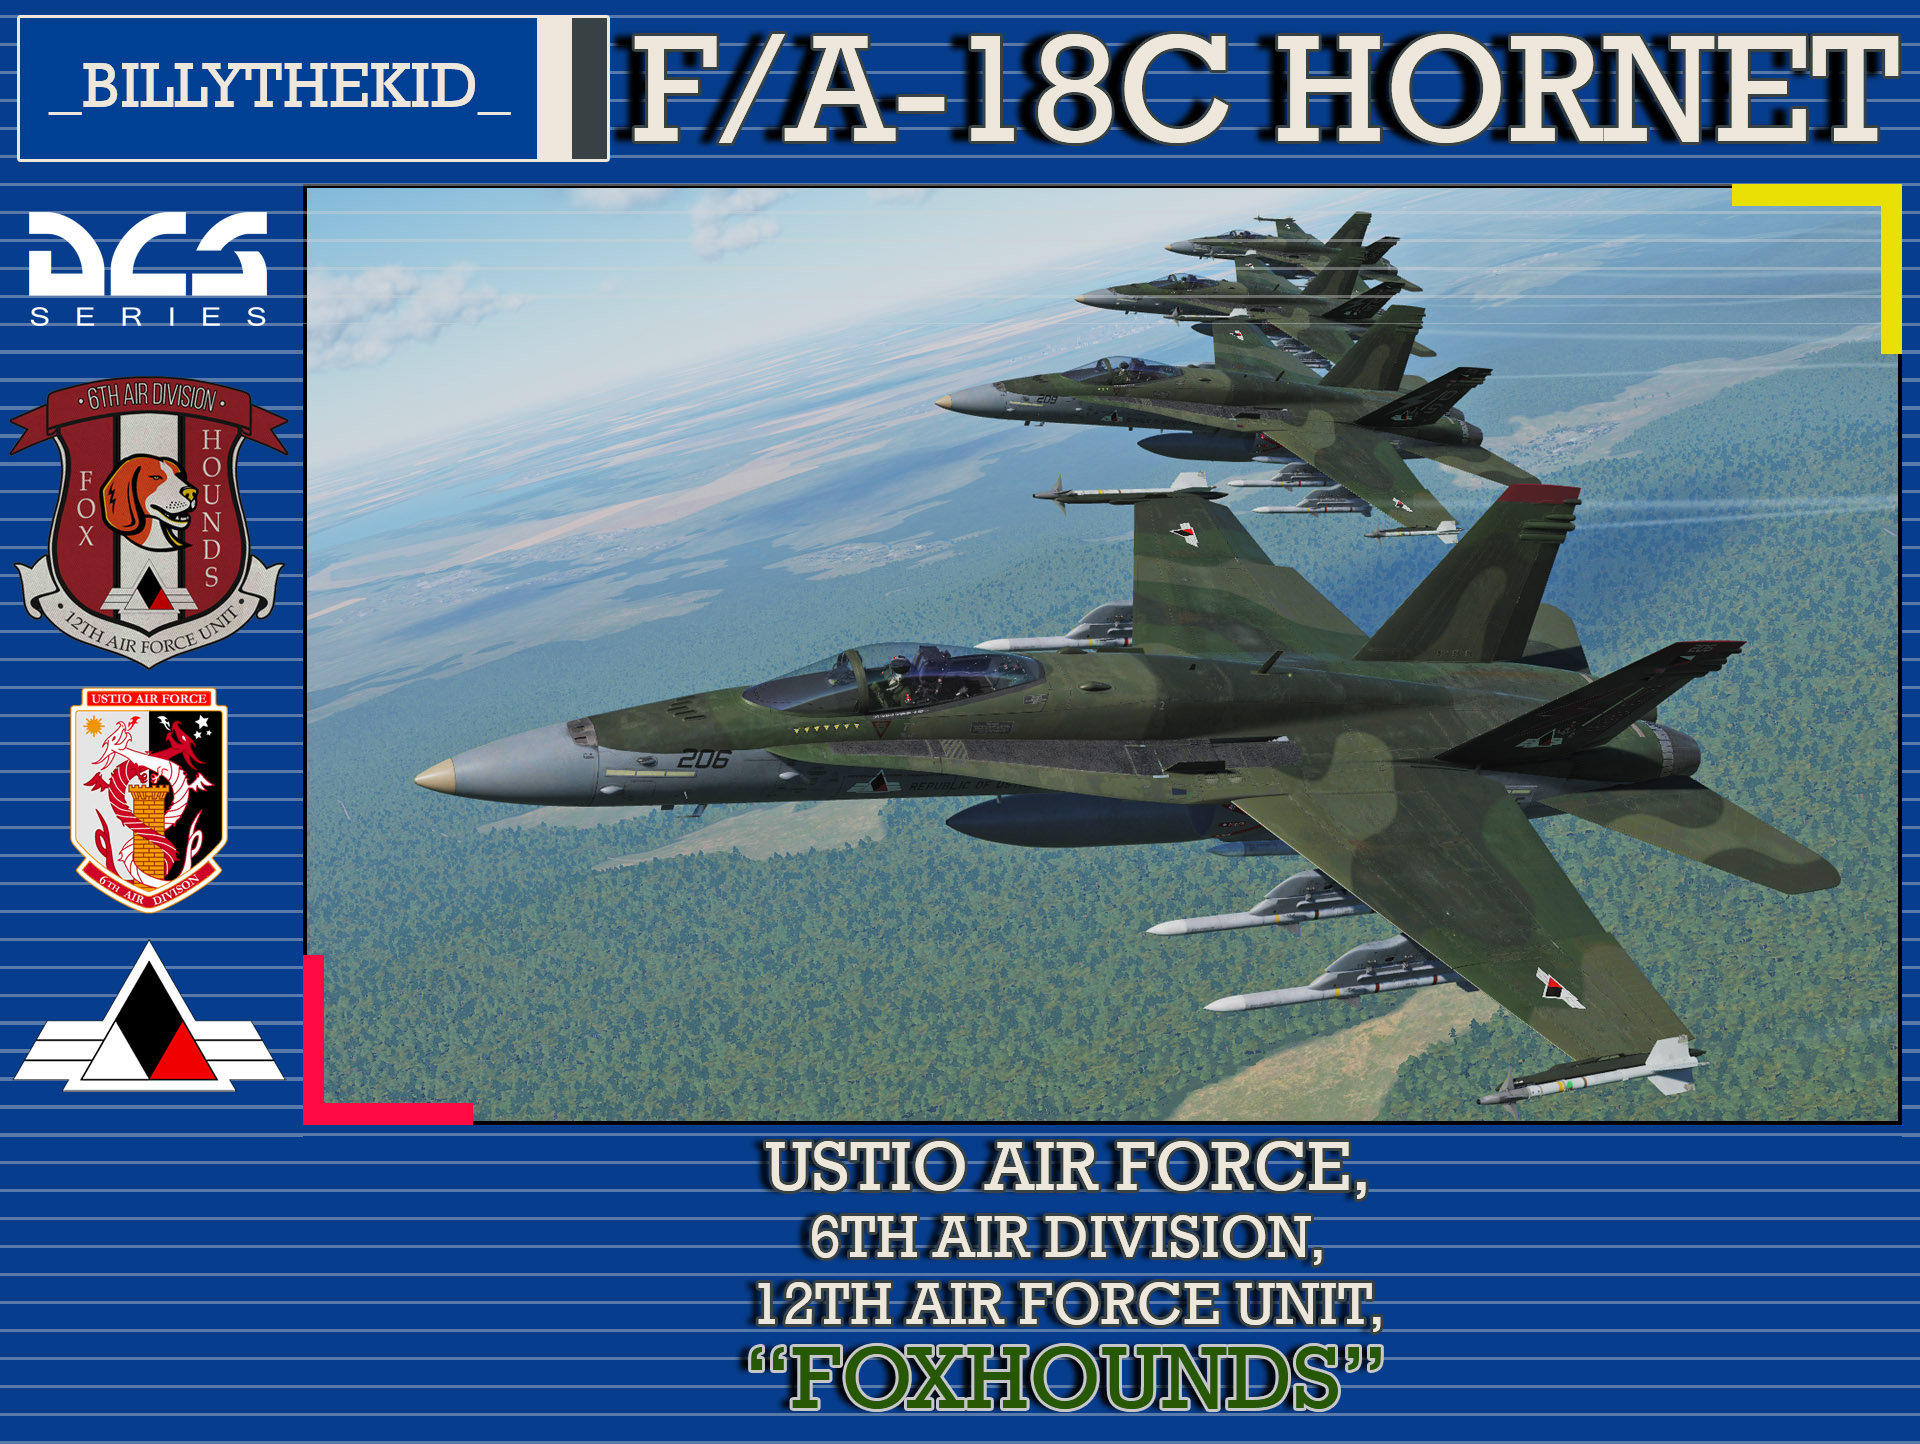 Ace Combat - Ustio Air Force - 6th Air Division - 12th Air Force Unit "Foxhounds" F/A-18C Hornet